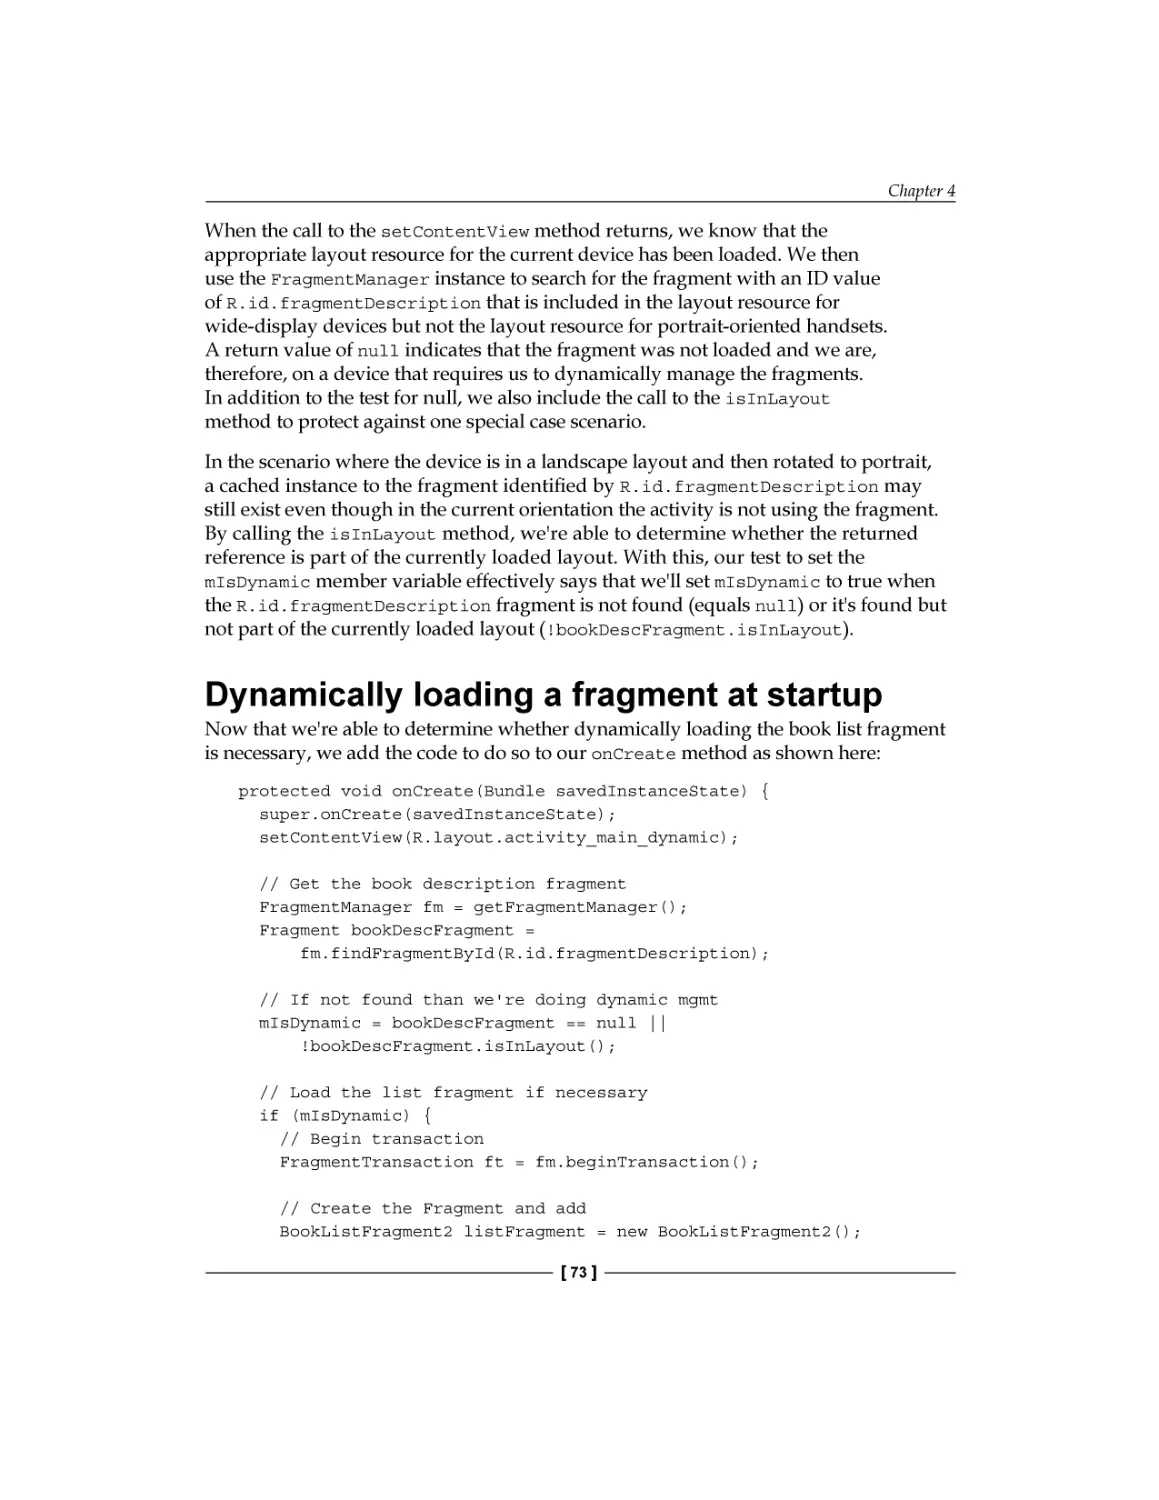 Dynamically loading a fragment at startup